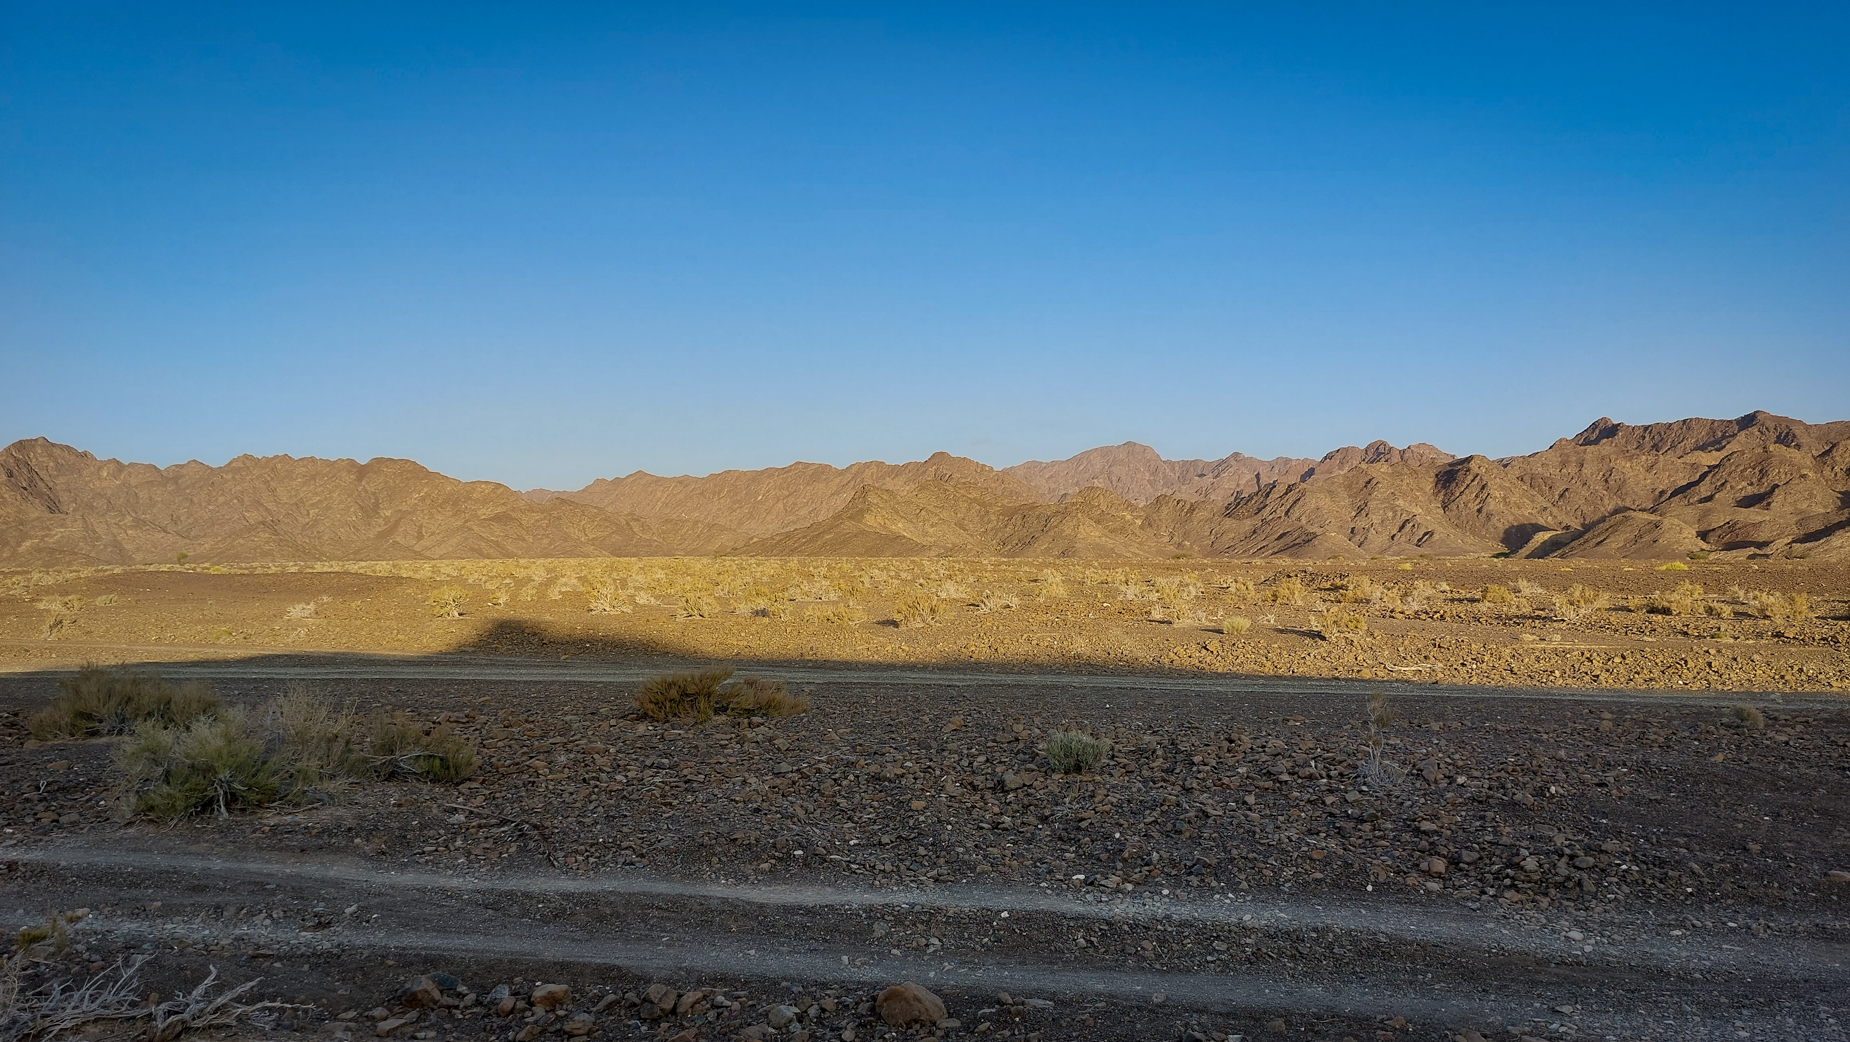 <span  class="uc_style_uc_tiles_grid_image_elementor_uc_items_attribute_title" style="color:#ffffff;">Also in Oman: great scenery</span>